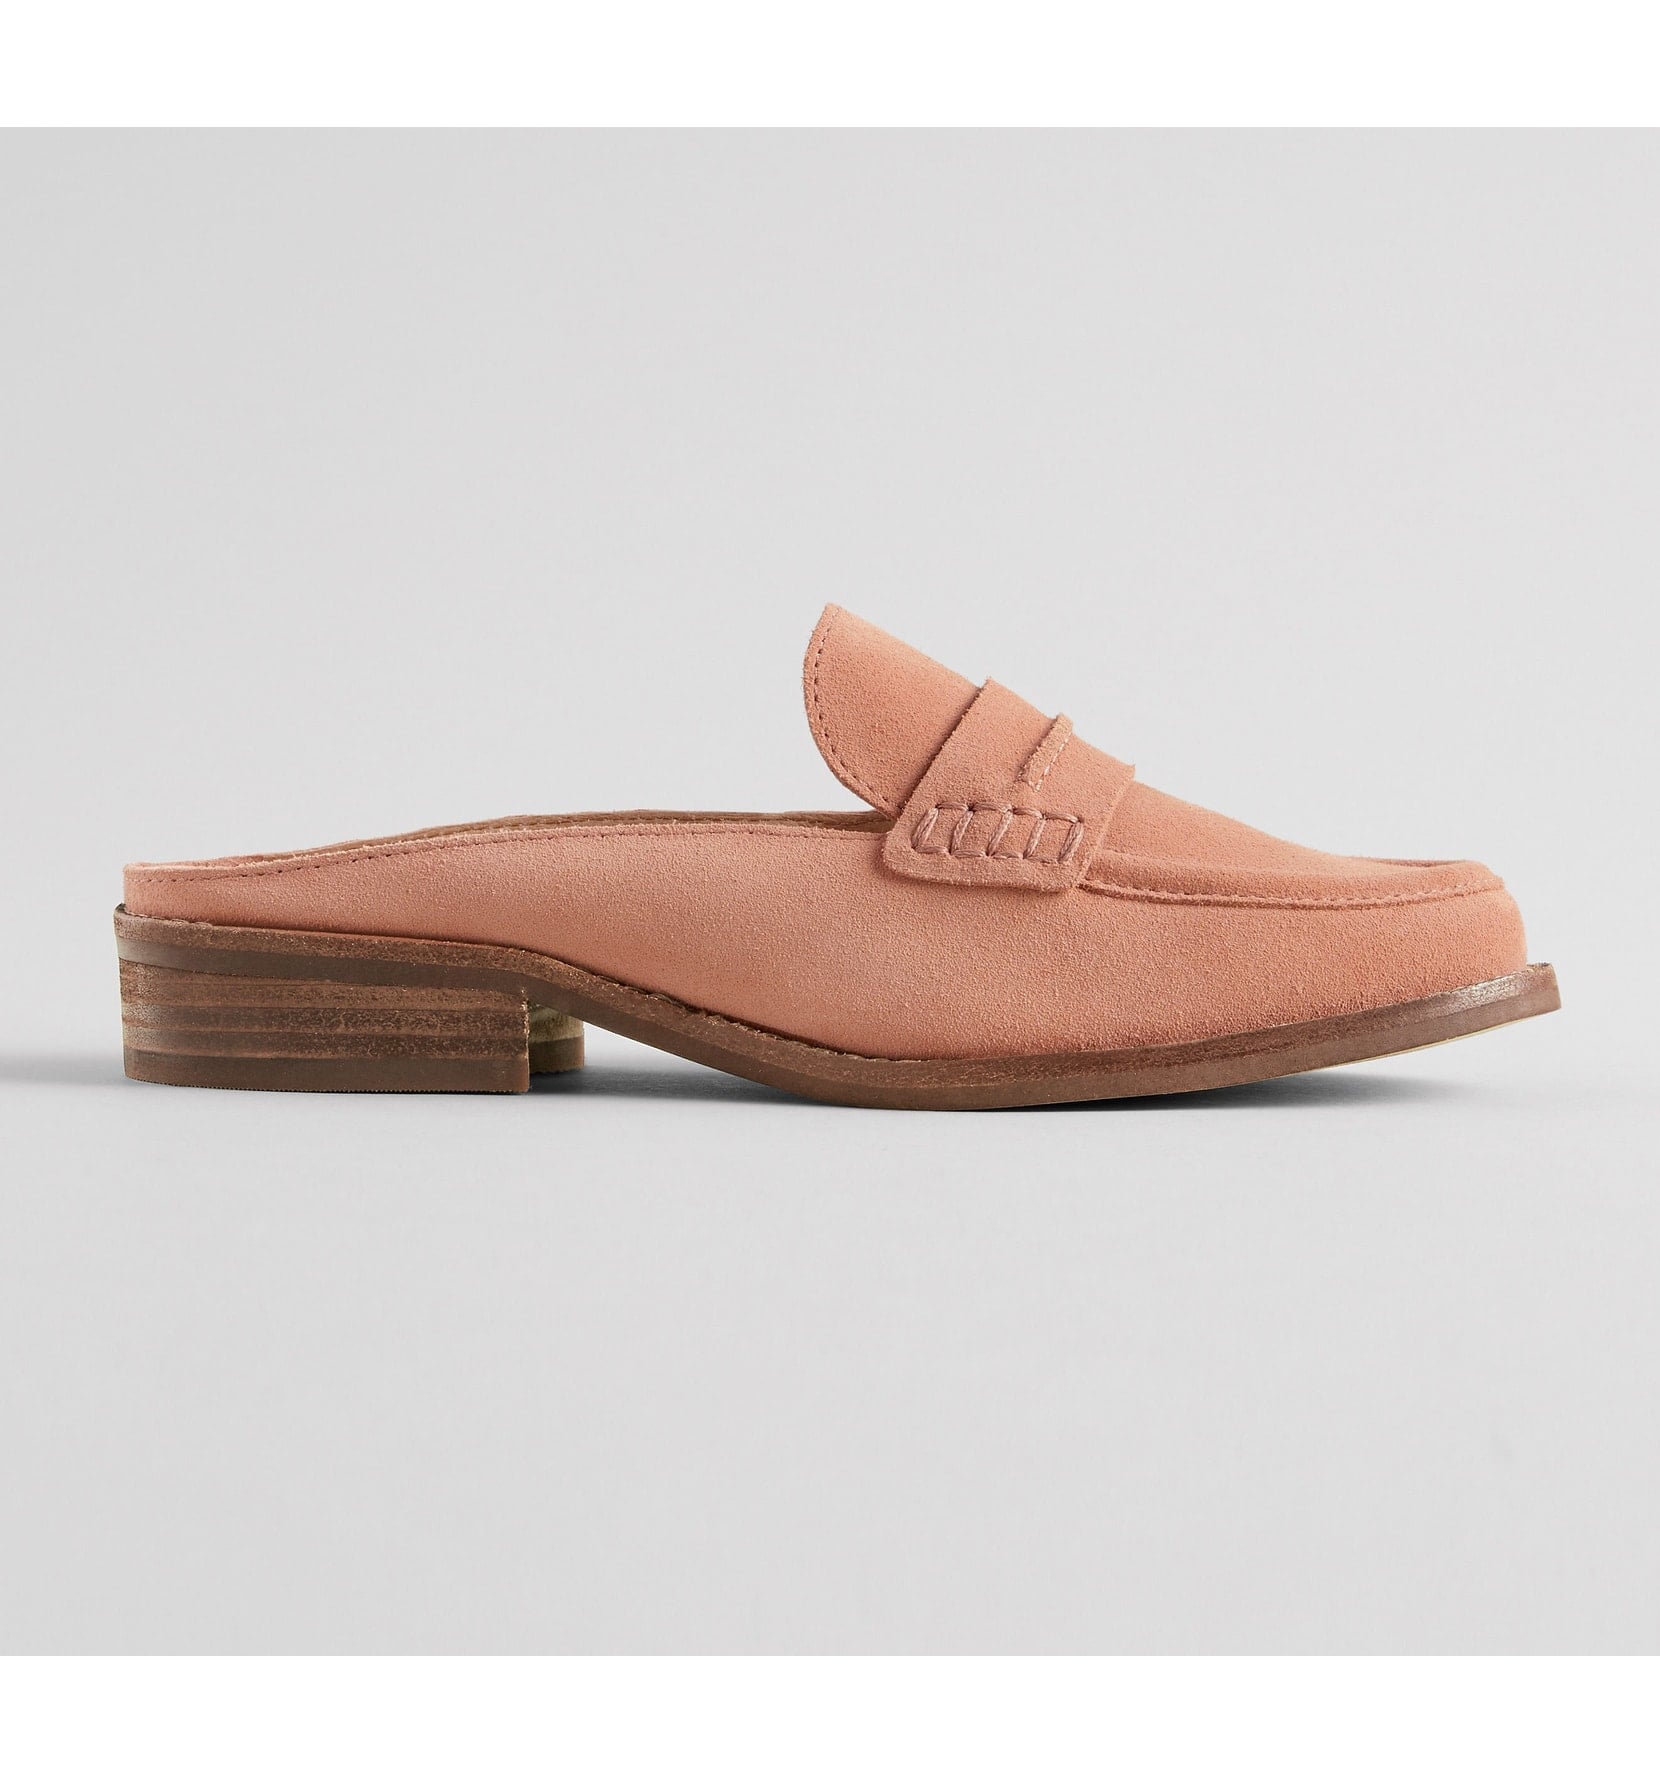 Madewell The Elinor Loafer Mule | Yay 